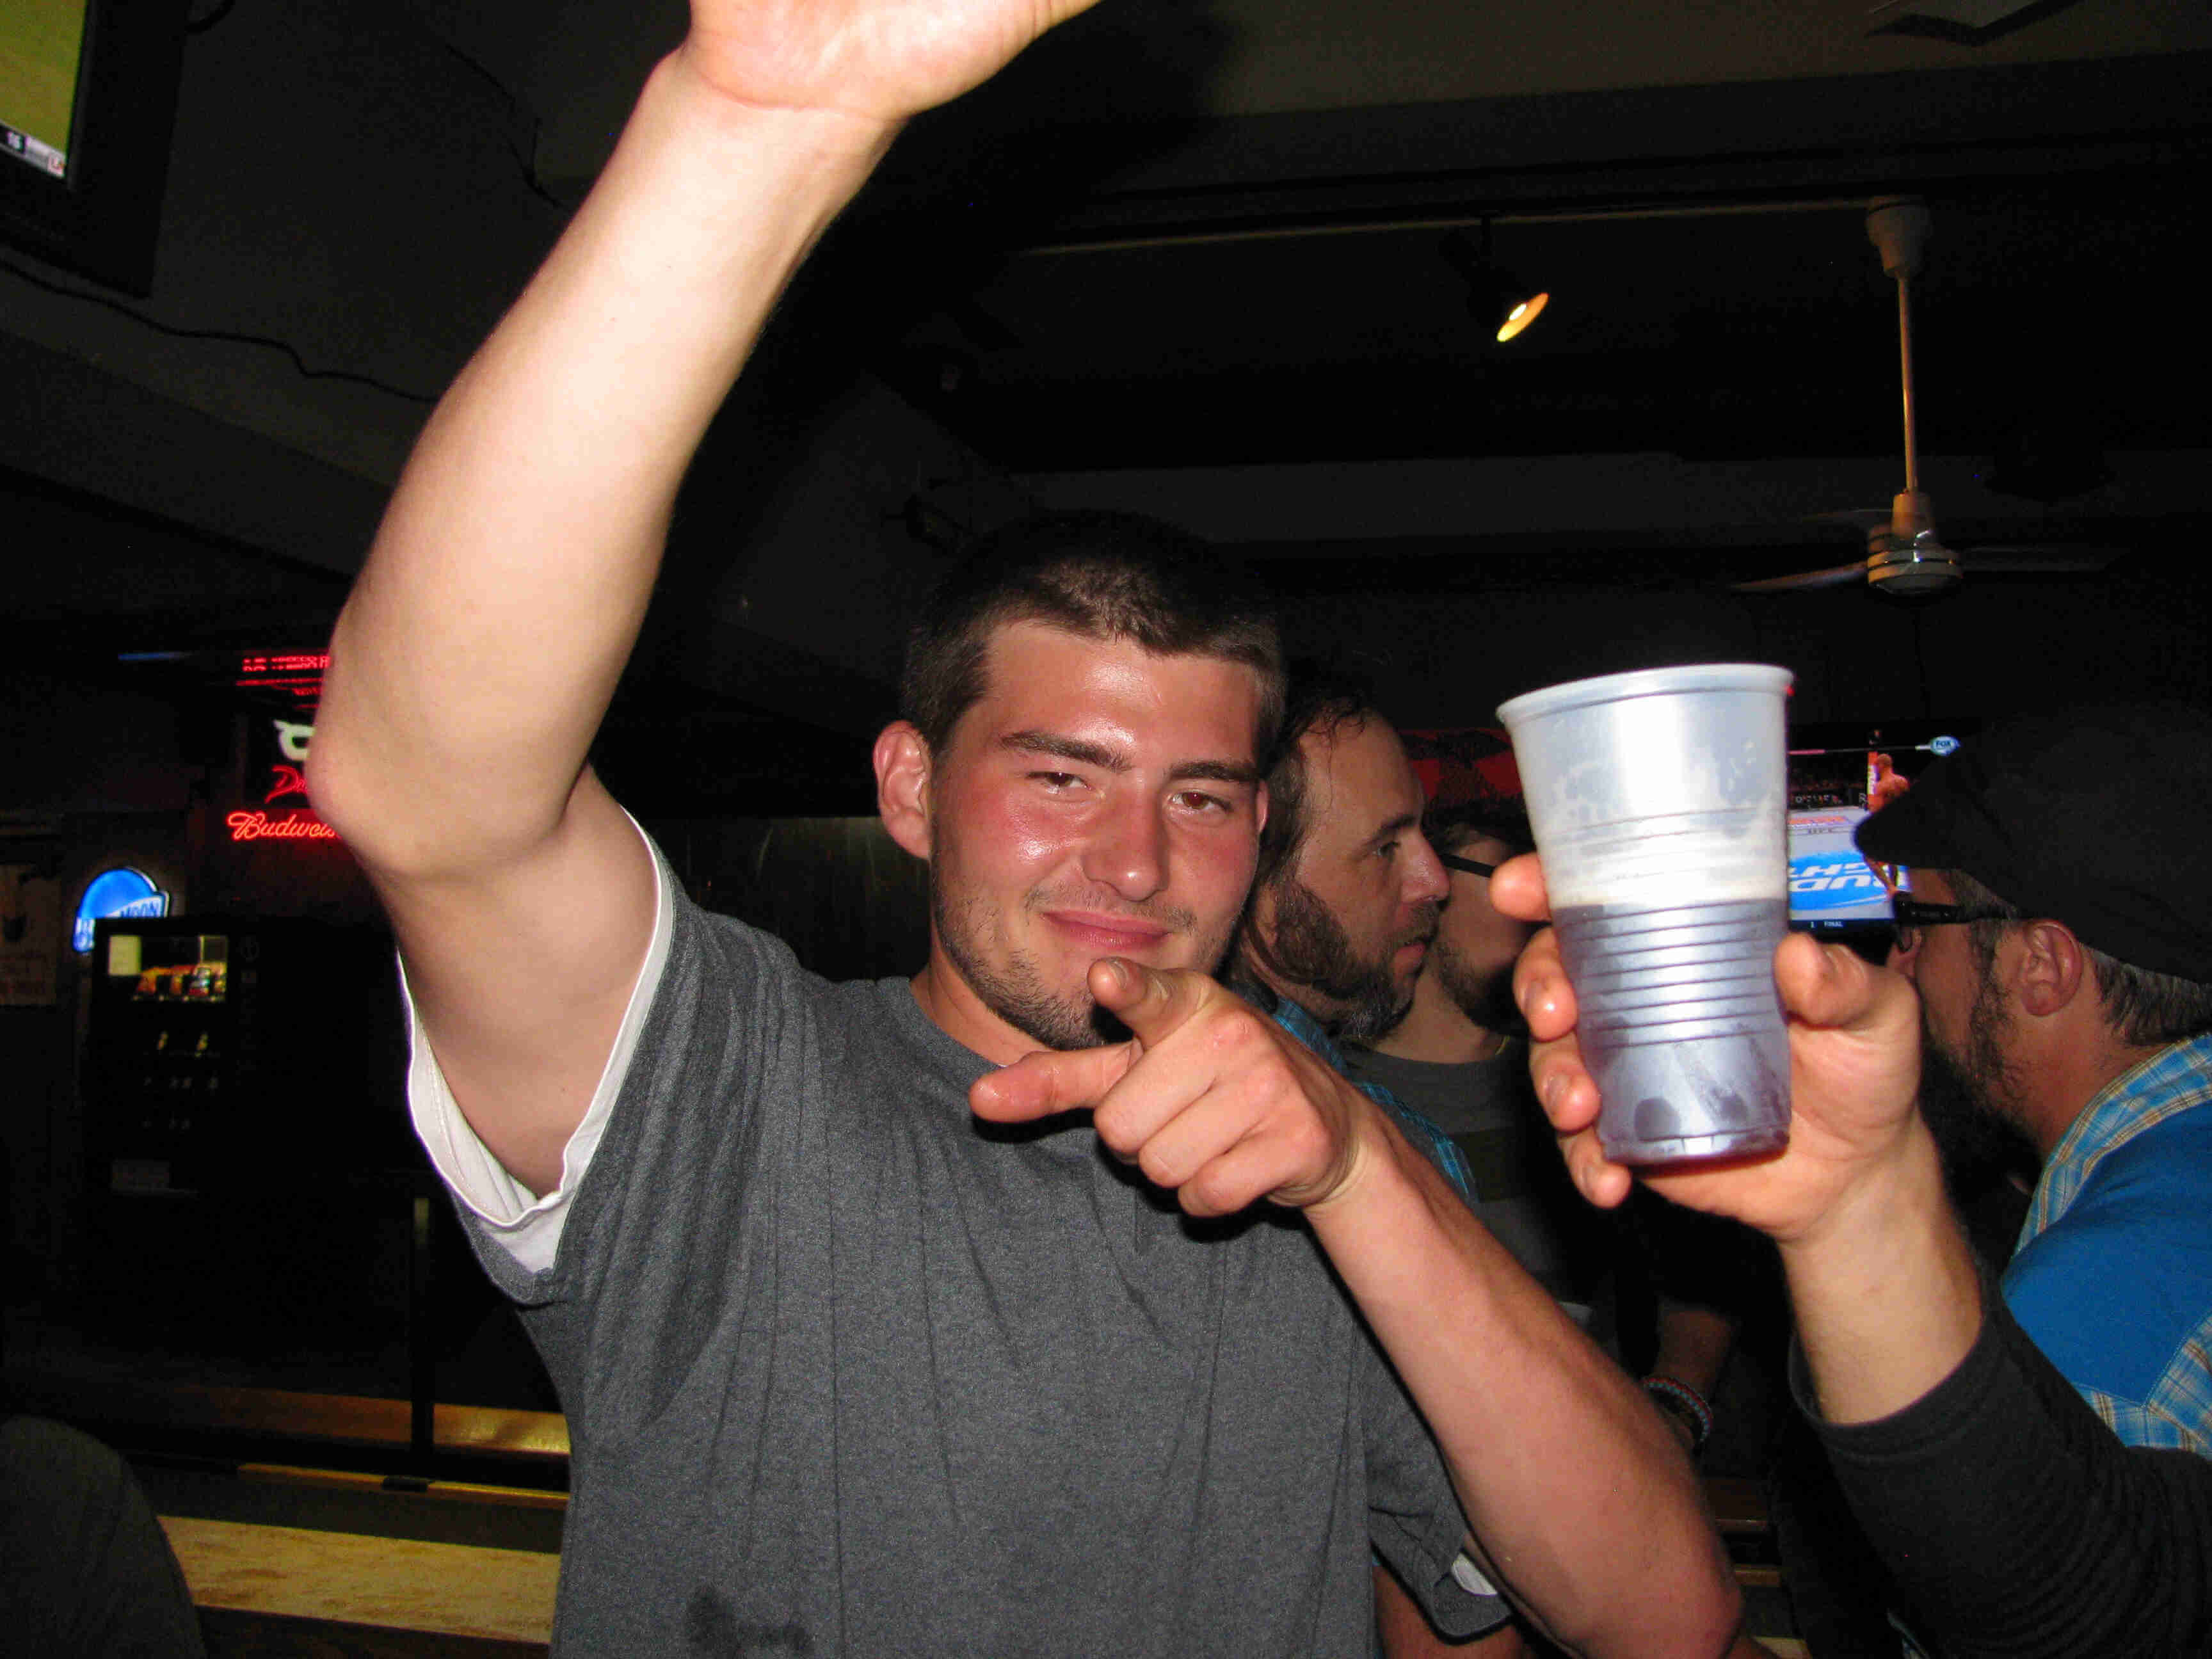 Front view of a person pointing with left their left hand and raising their right arm, in a dimly lit bar